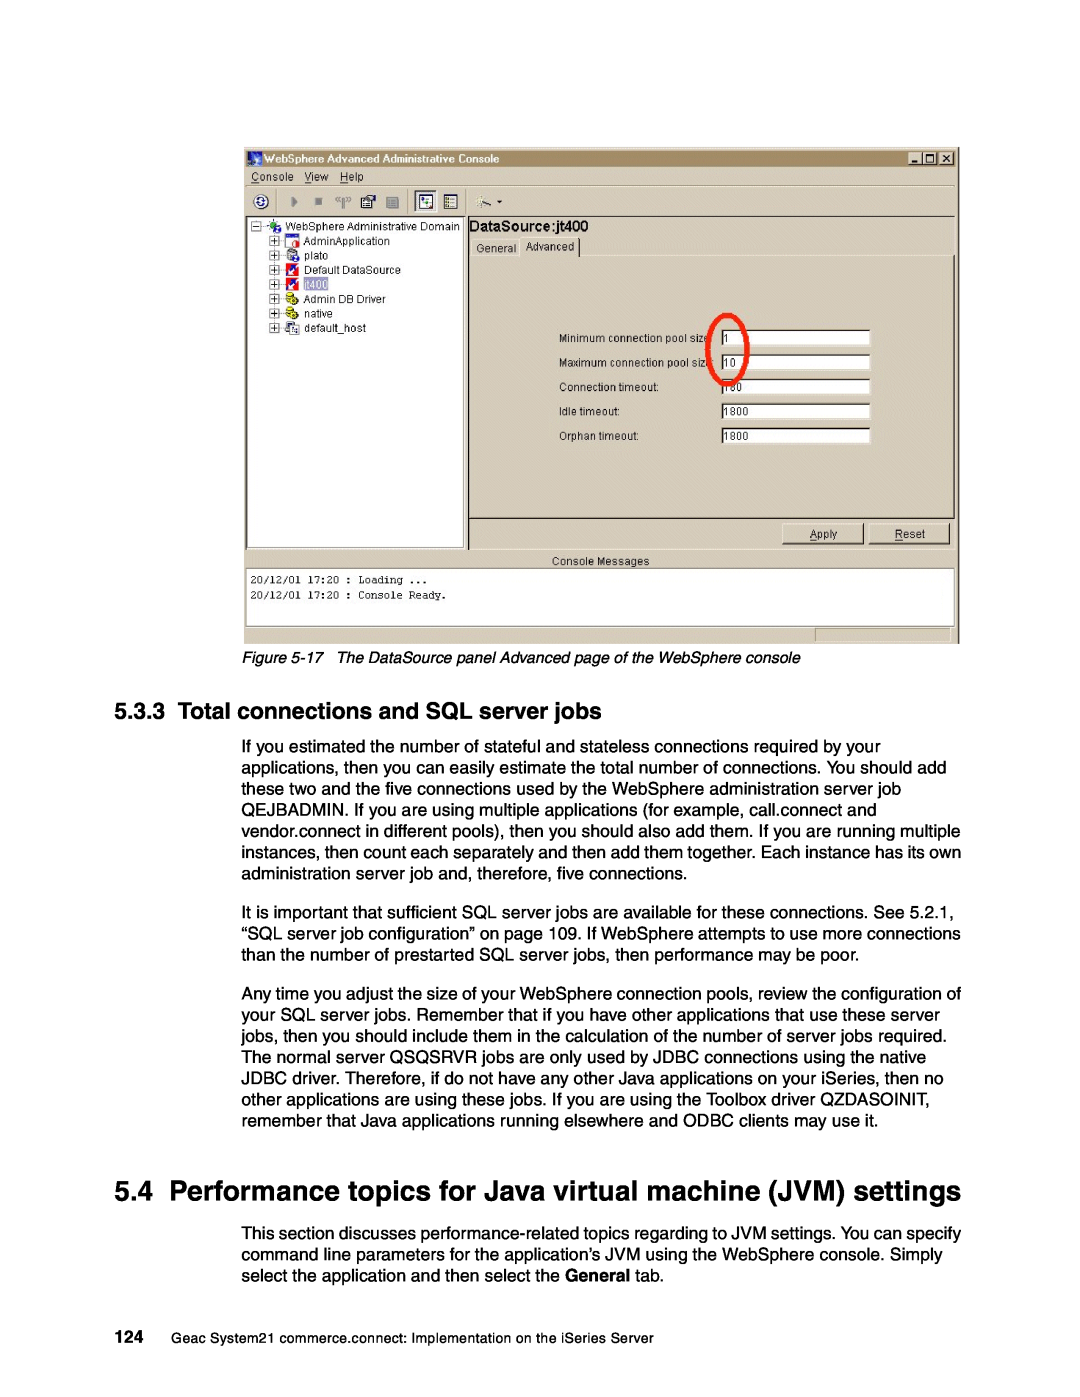 IBM SG24-6526-00 manual Performance topics for Java virtual machine JVM settings, Total connections and SQL server jobs 